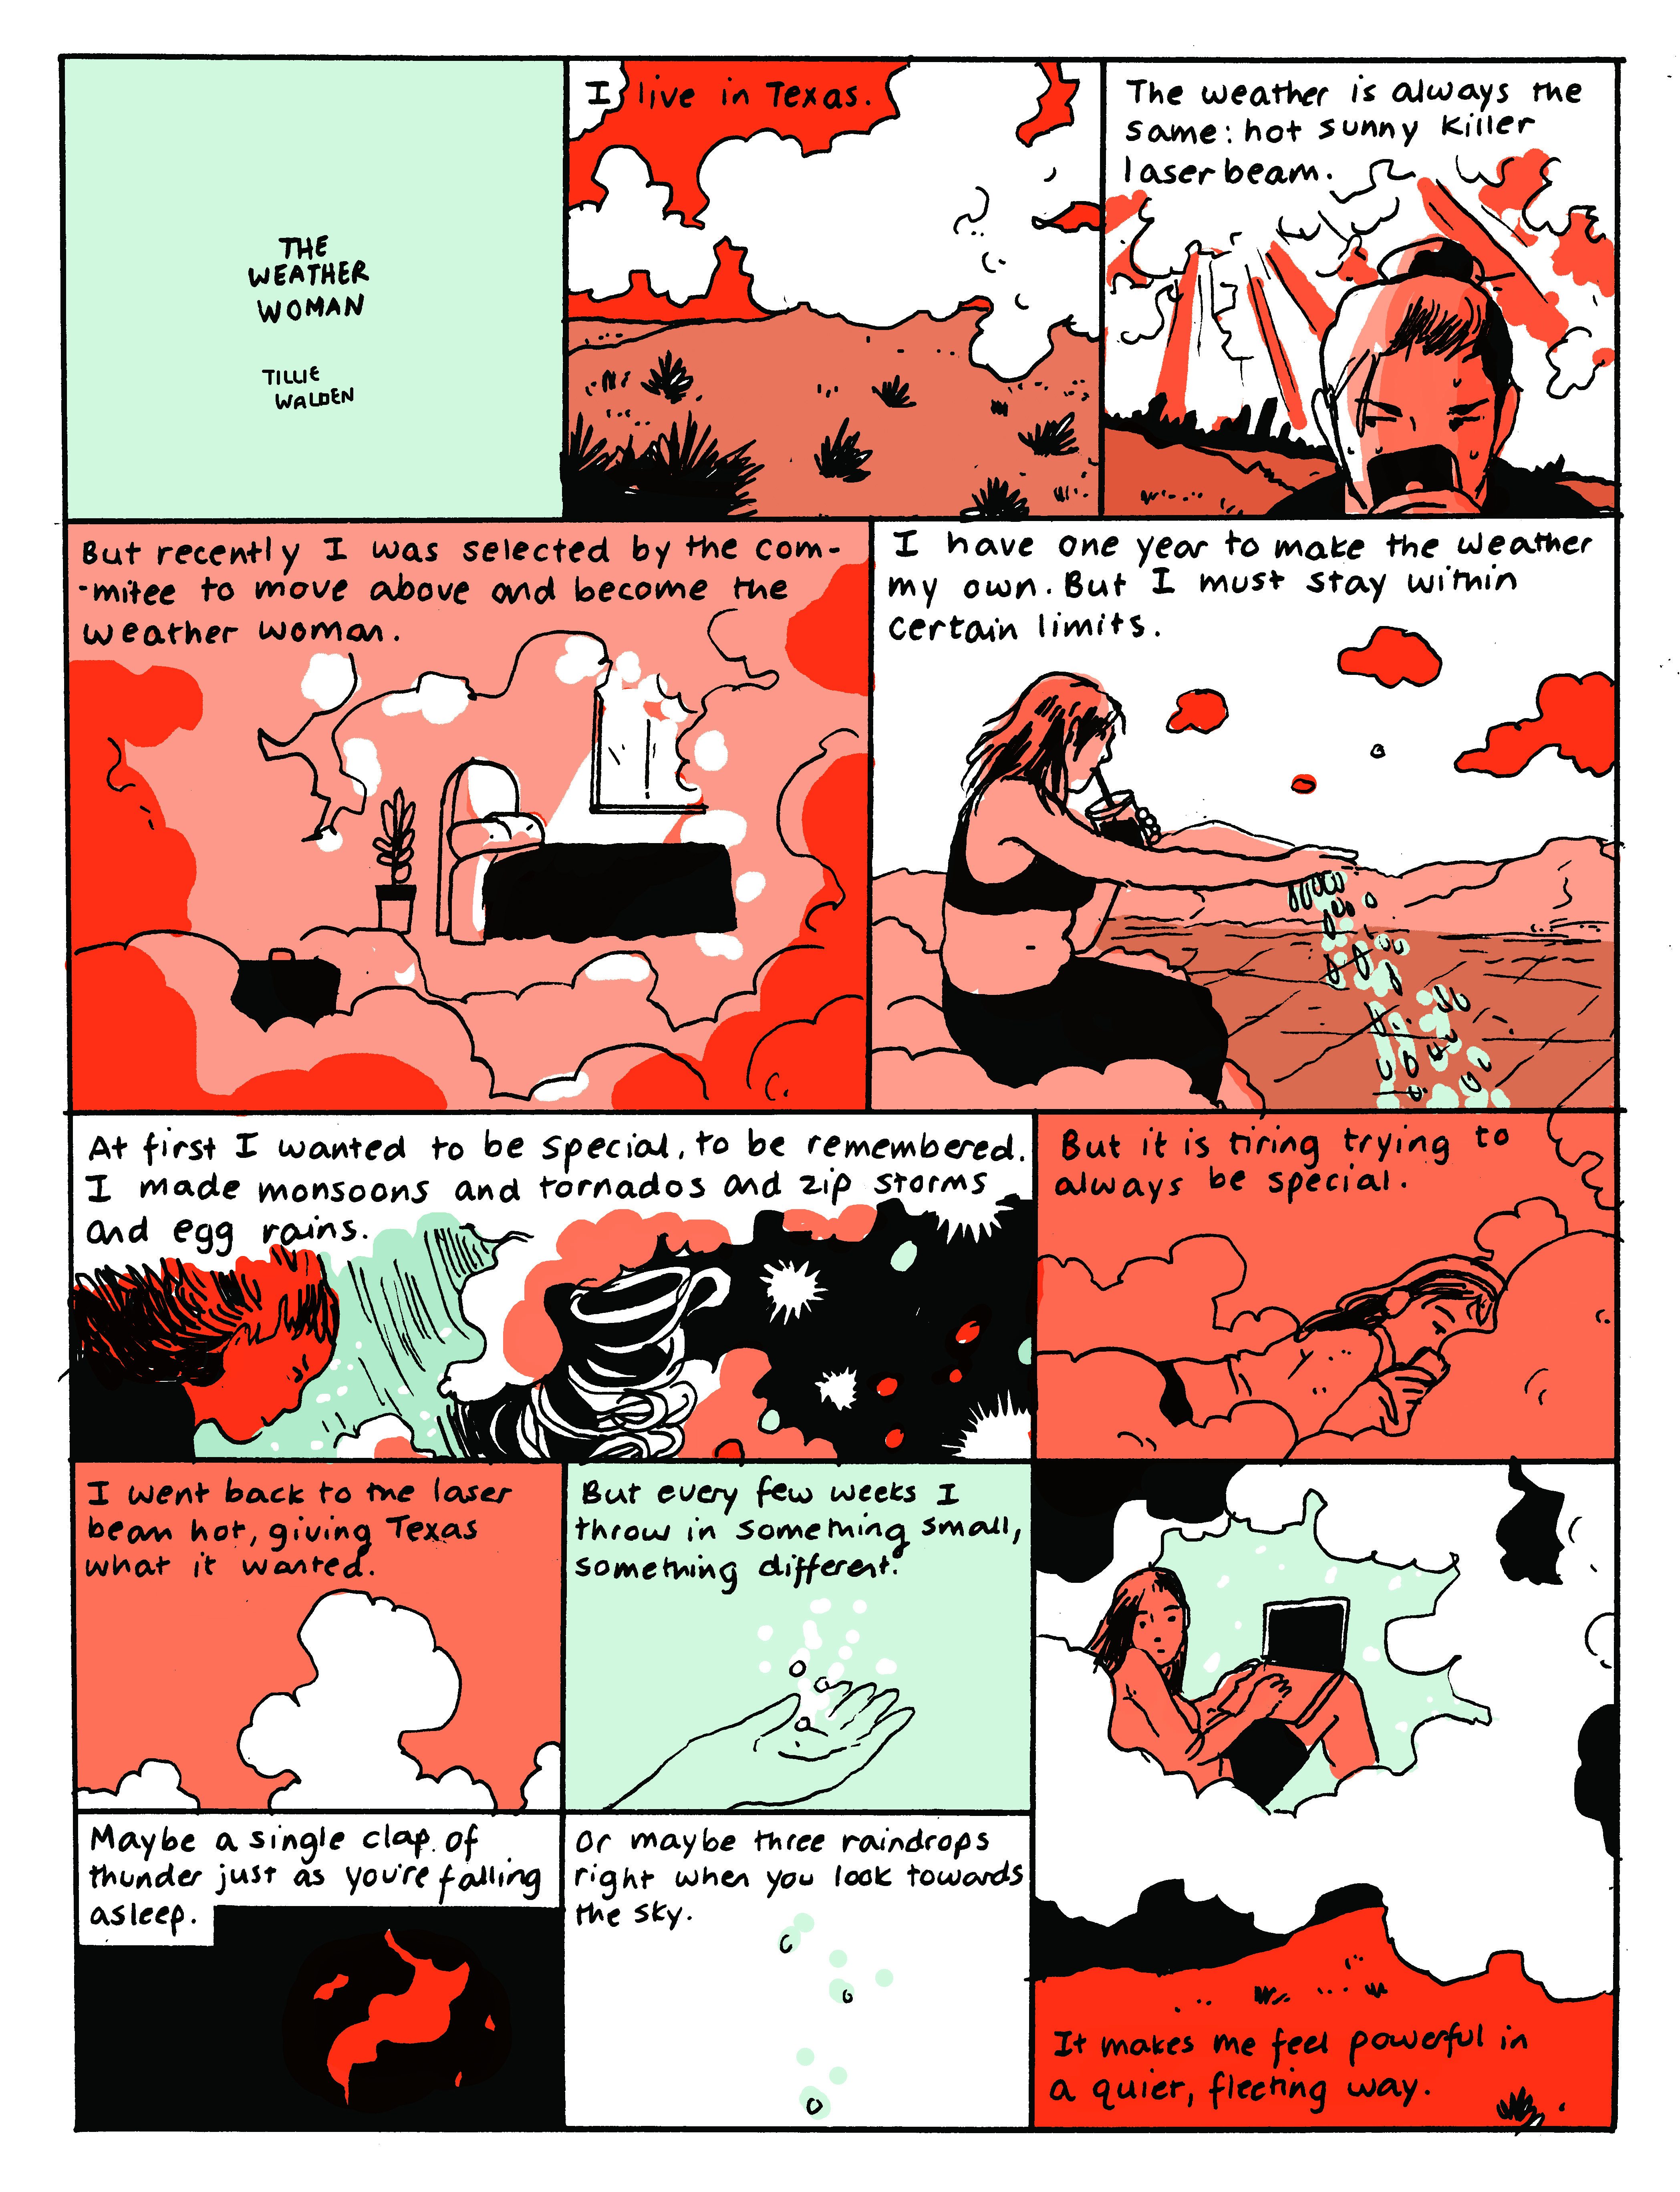 Weather Woman by Tillie Walden